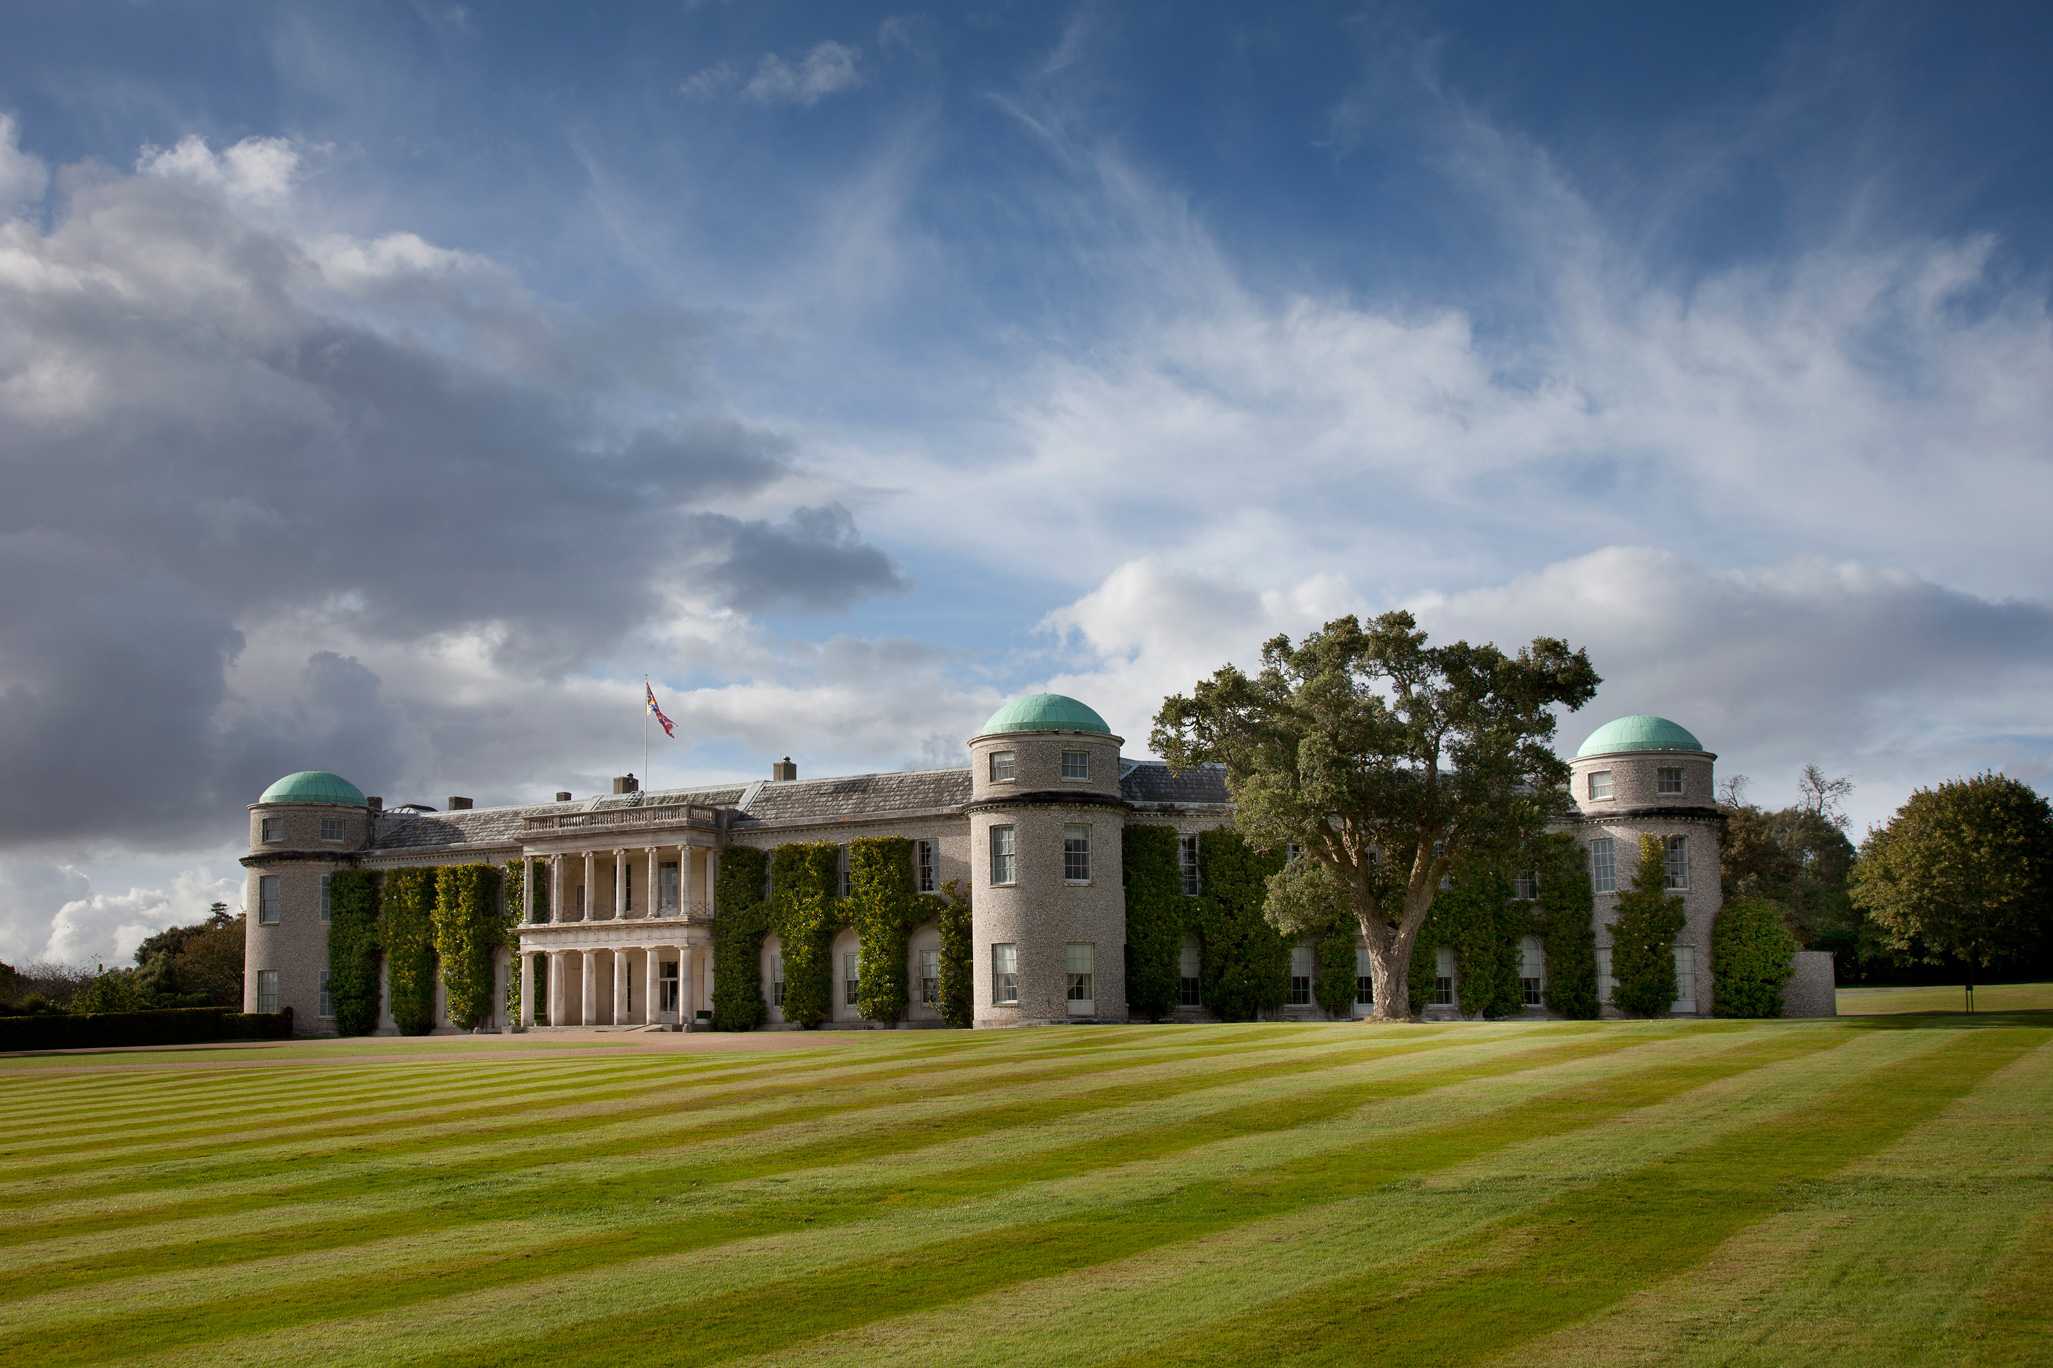 Goodwood House, West Sussex, England